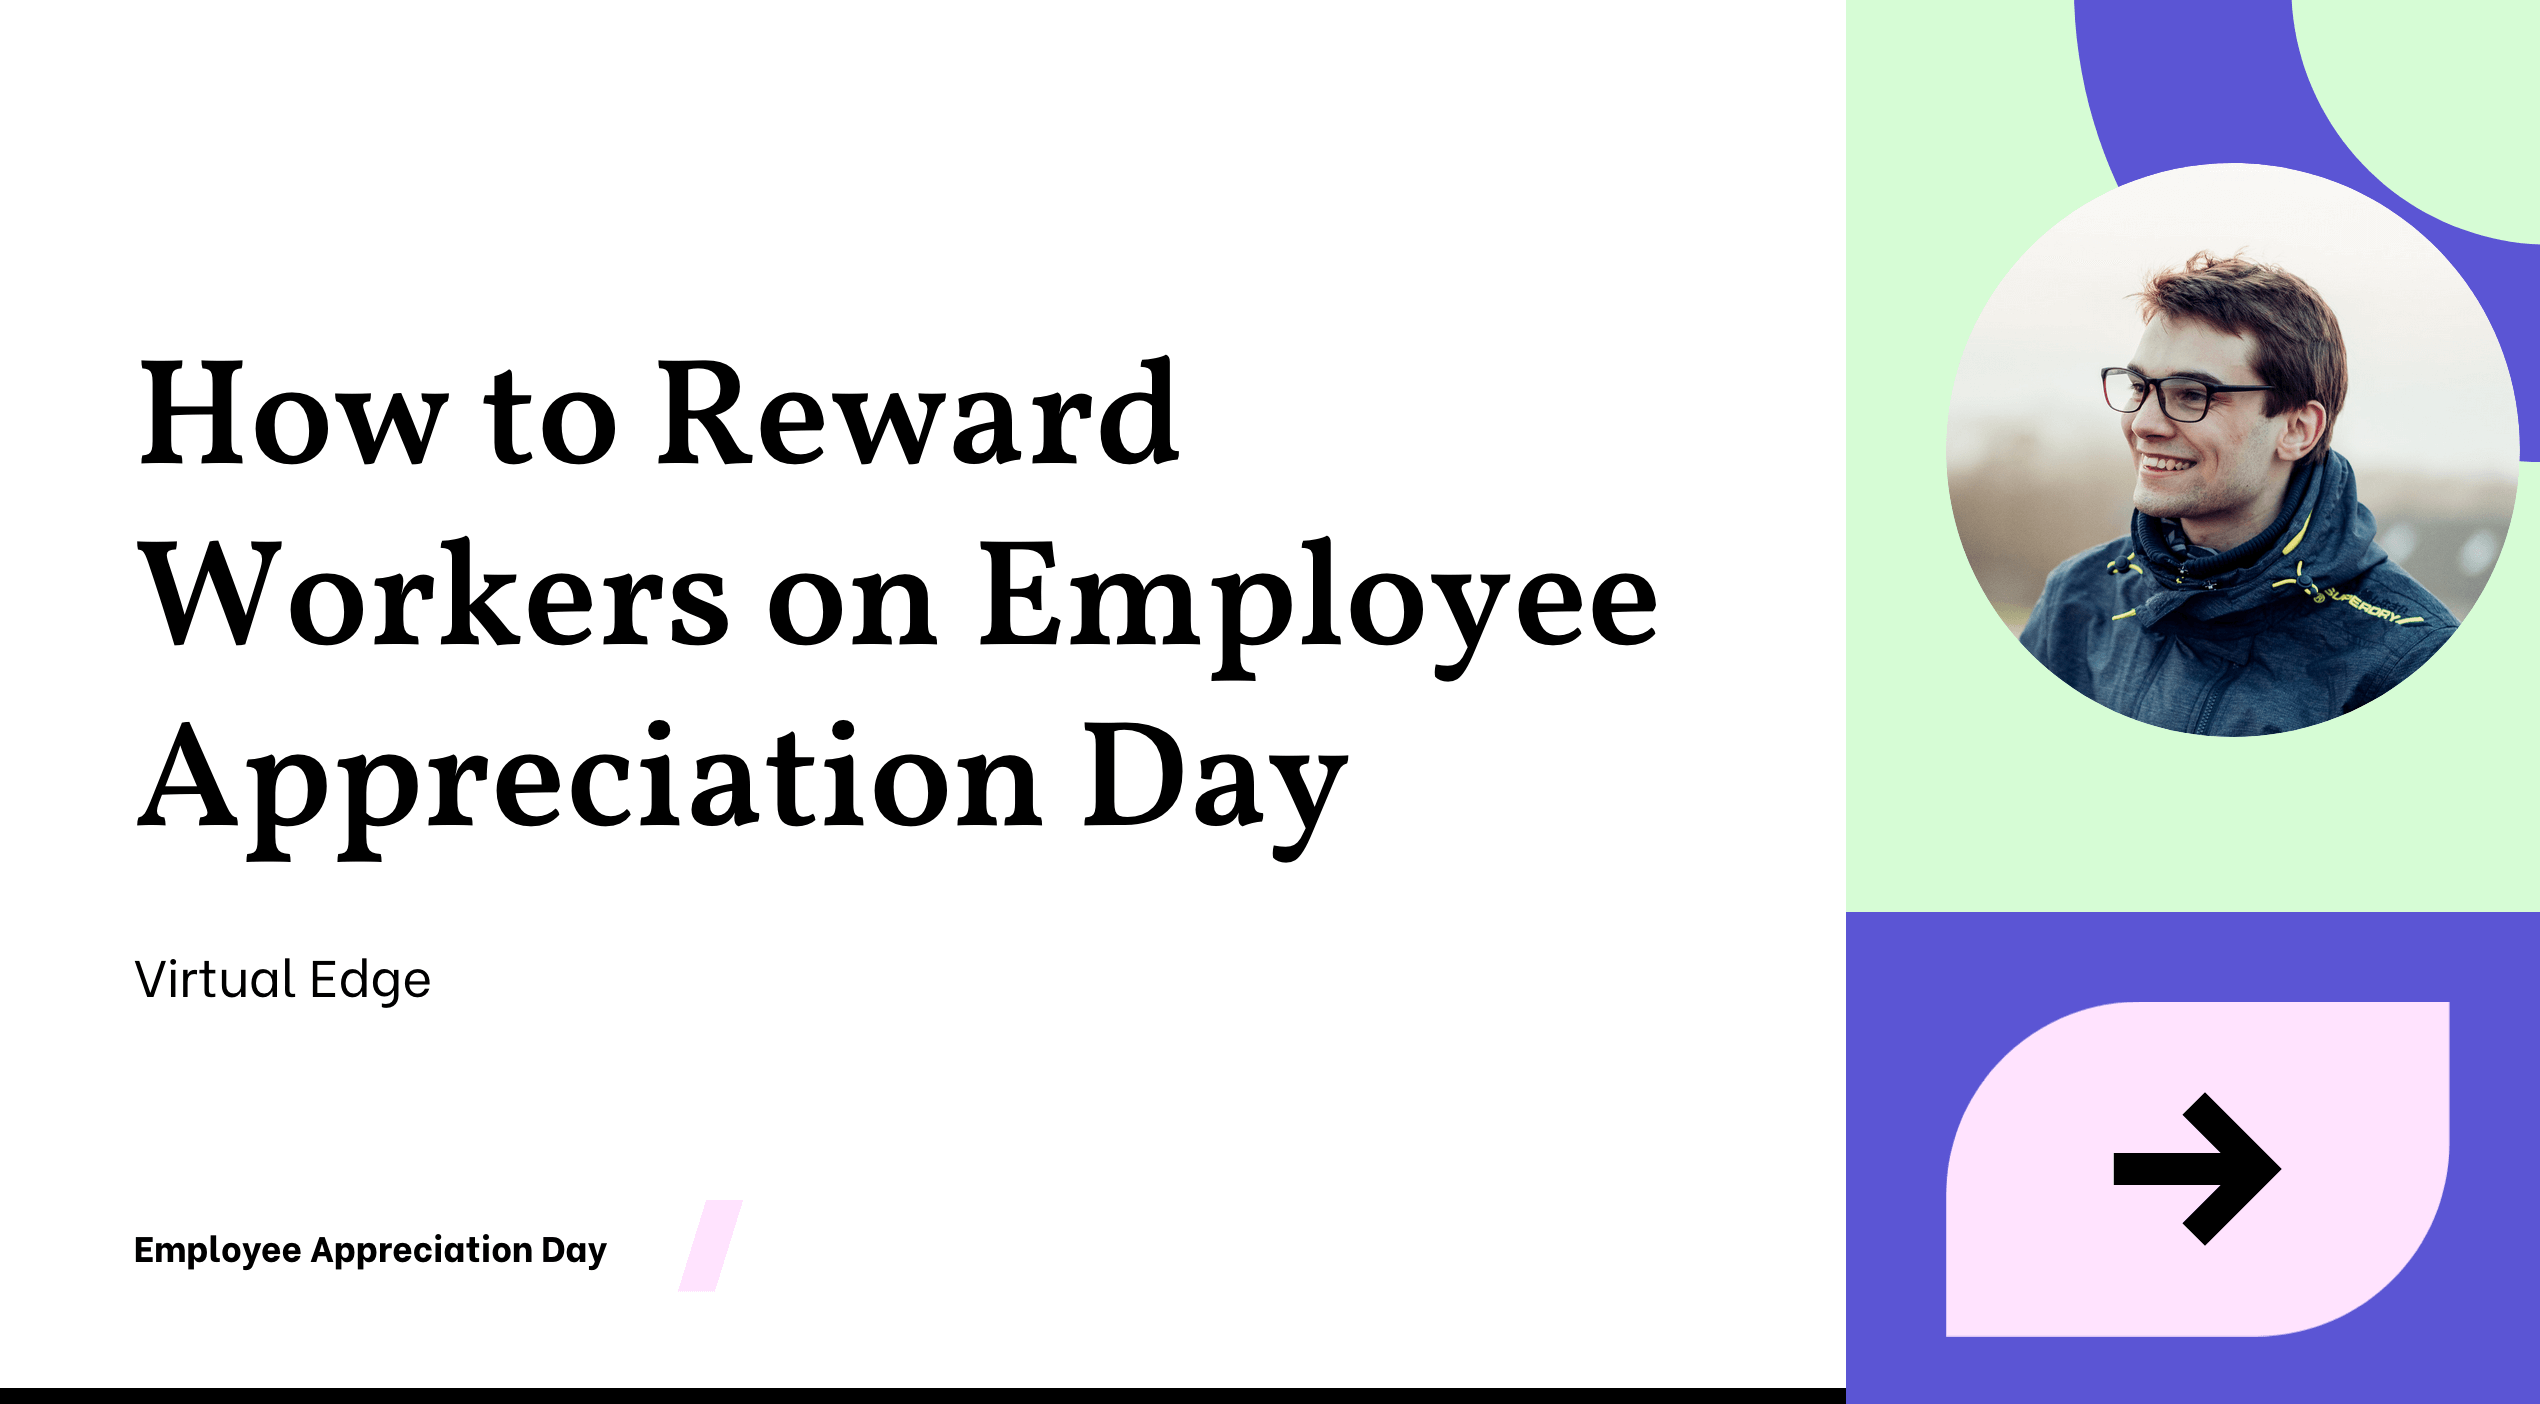 How to Reward Workers on Employee Appreciation Day